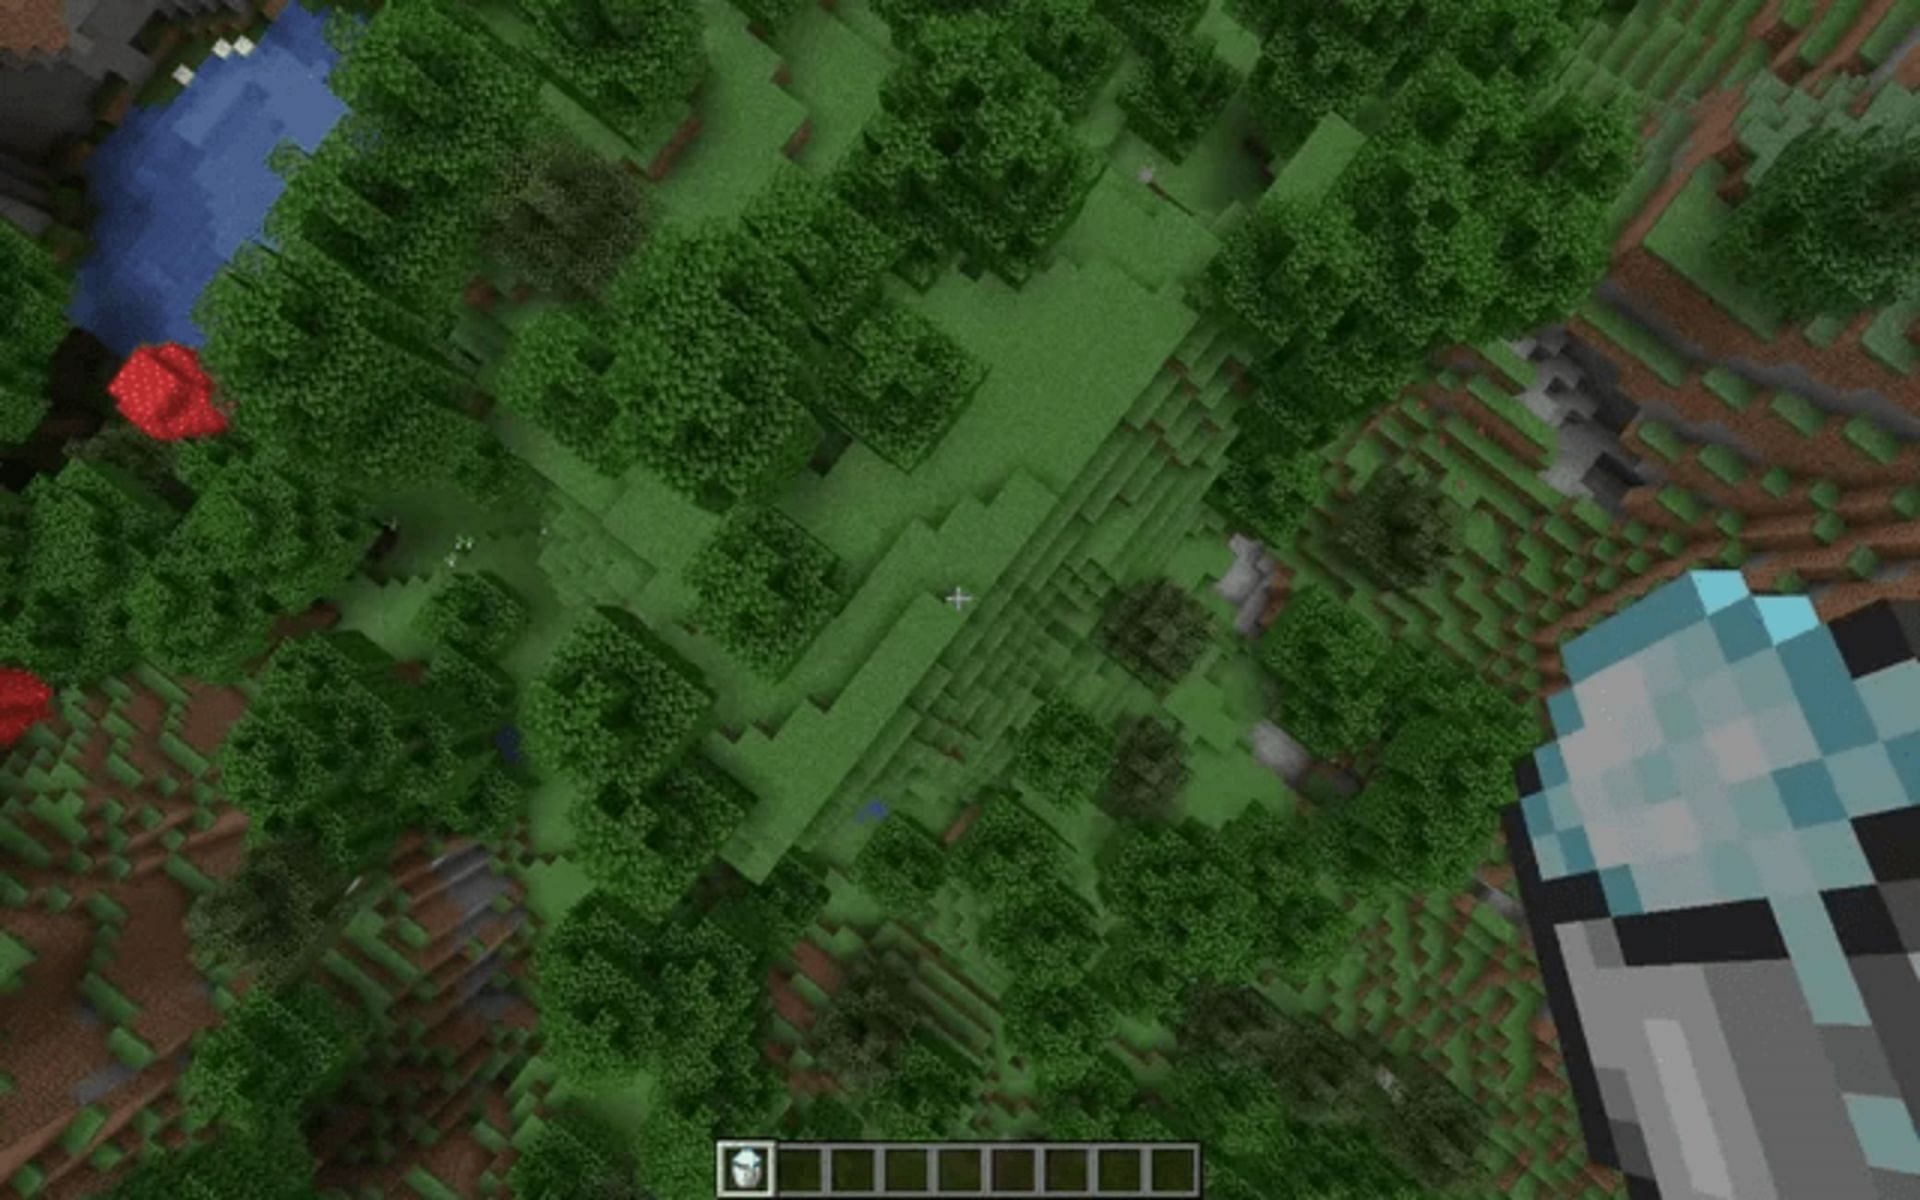 MLG in Minecraft usually points to certain survival tricks (Image via u/i-doo-not-know/Reddit)